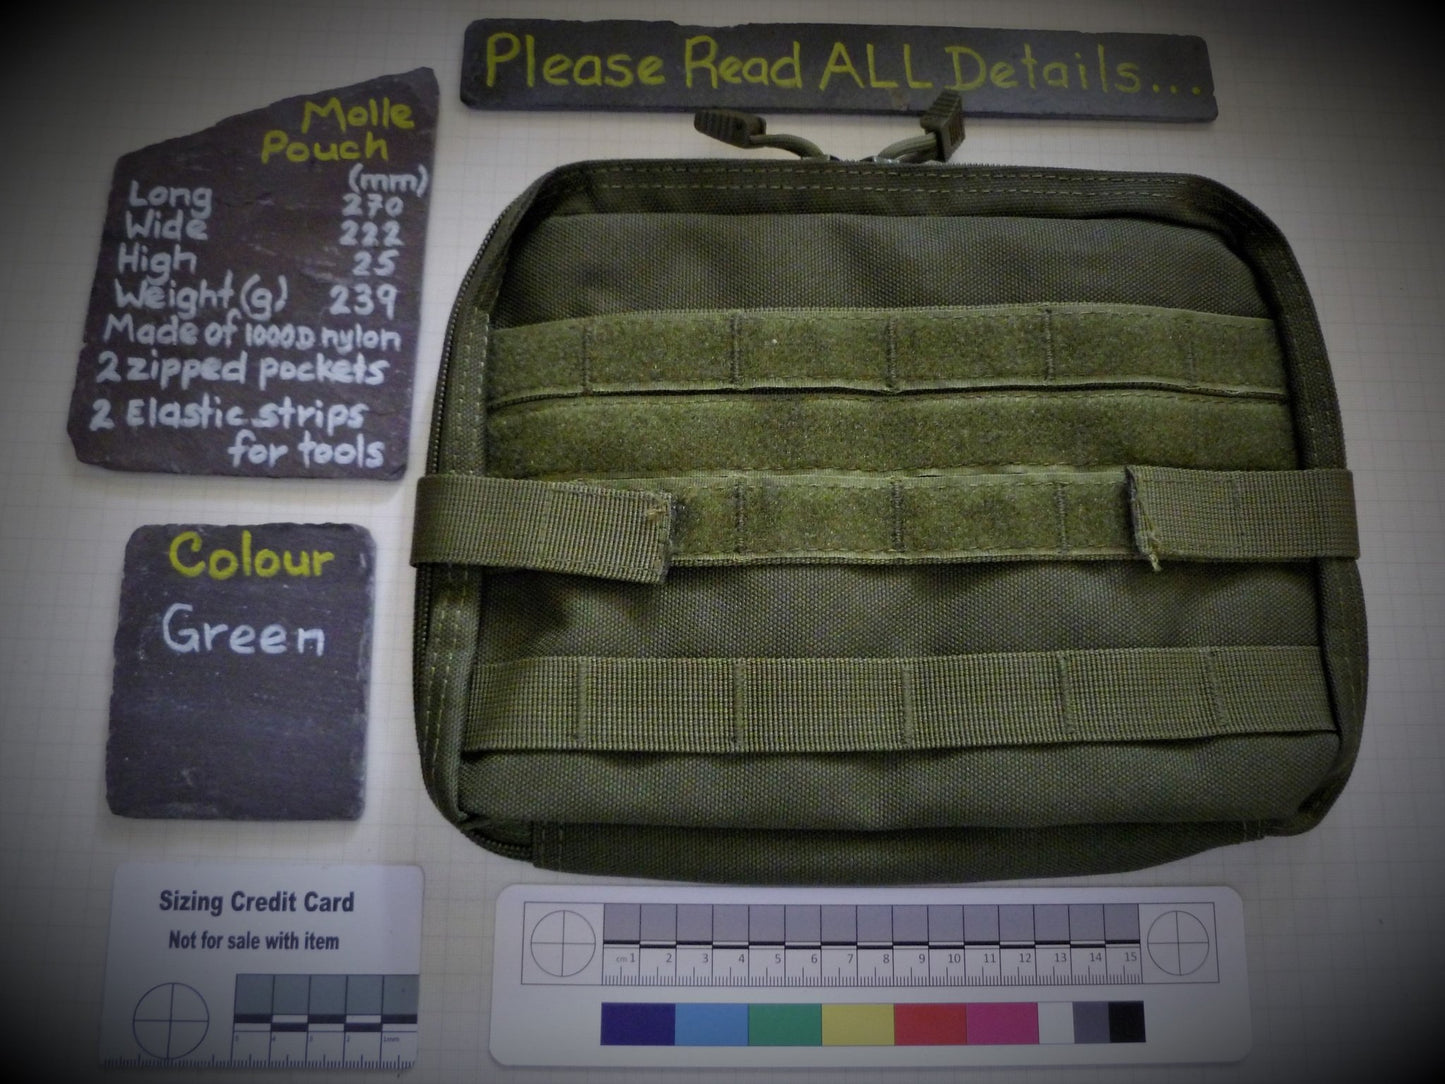 Large Molle Pouch for the Modular Lightweight Load-carrying Equipment system Molle Pouch Huggins Attic Green   [Huggins attic]